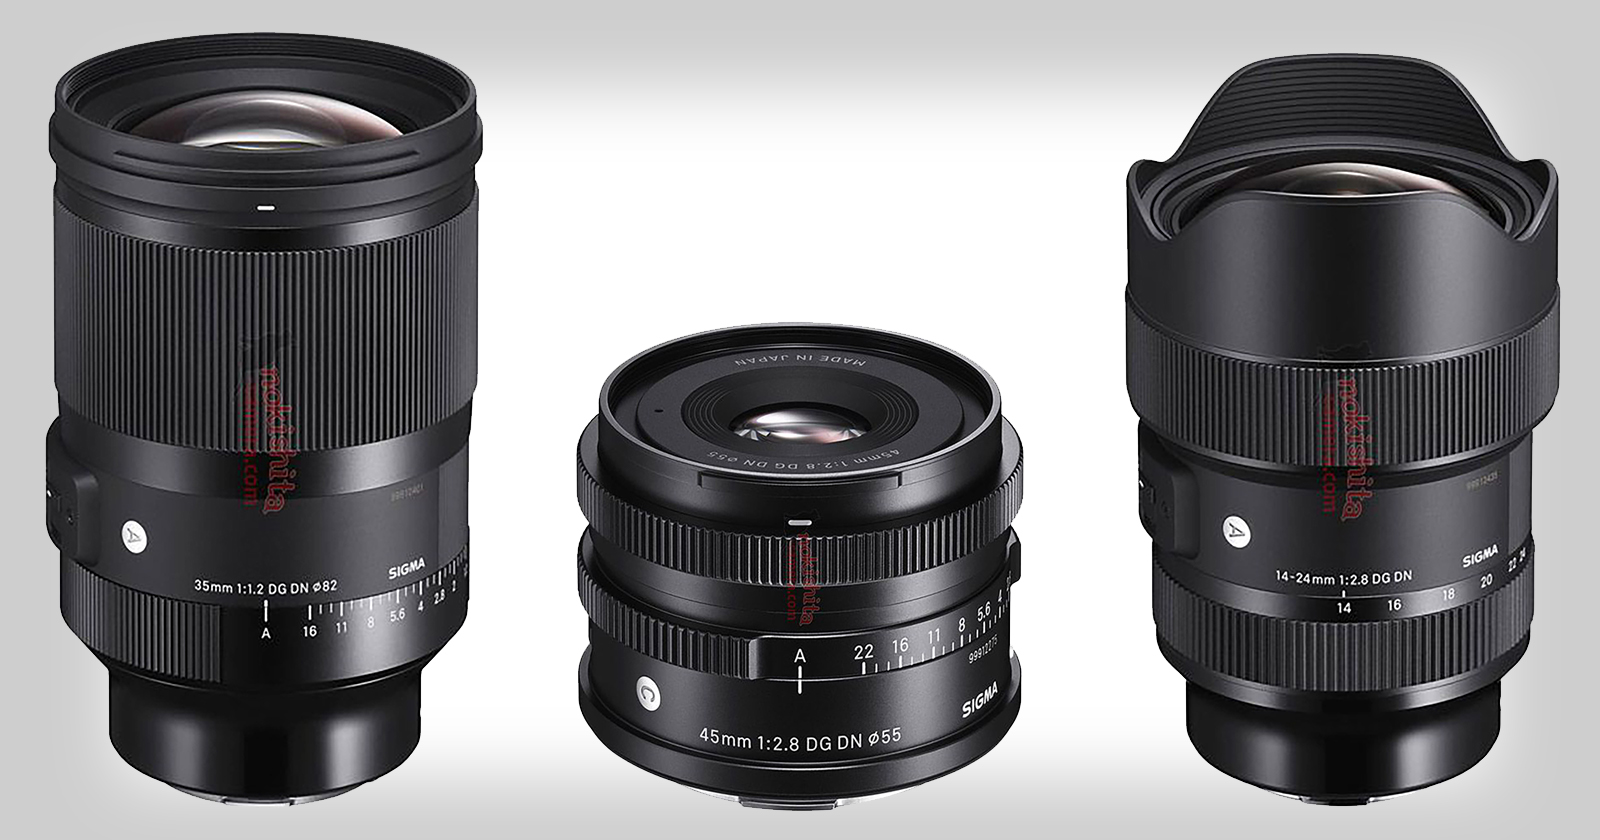 Photos and Pricing of Sigma 14-24mm f/2.8, 35mm f/1.2 and 45mm f/2.8